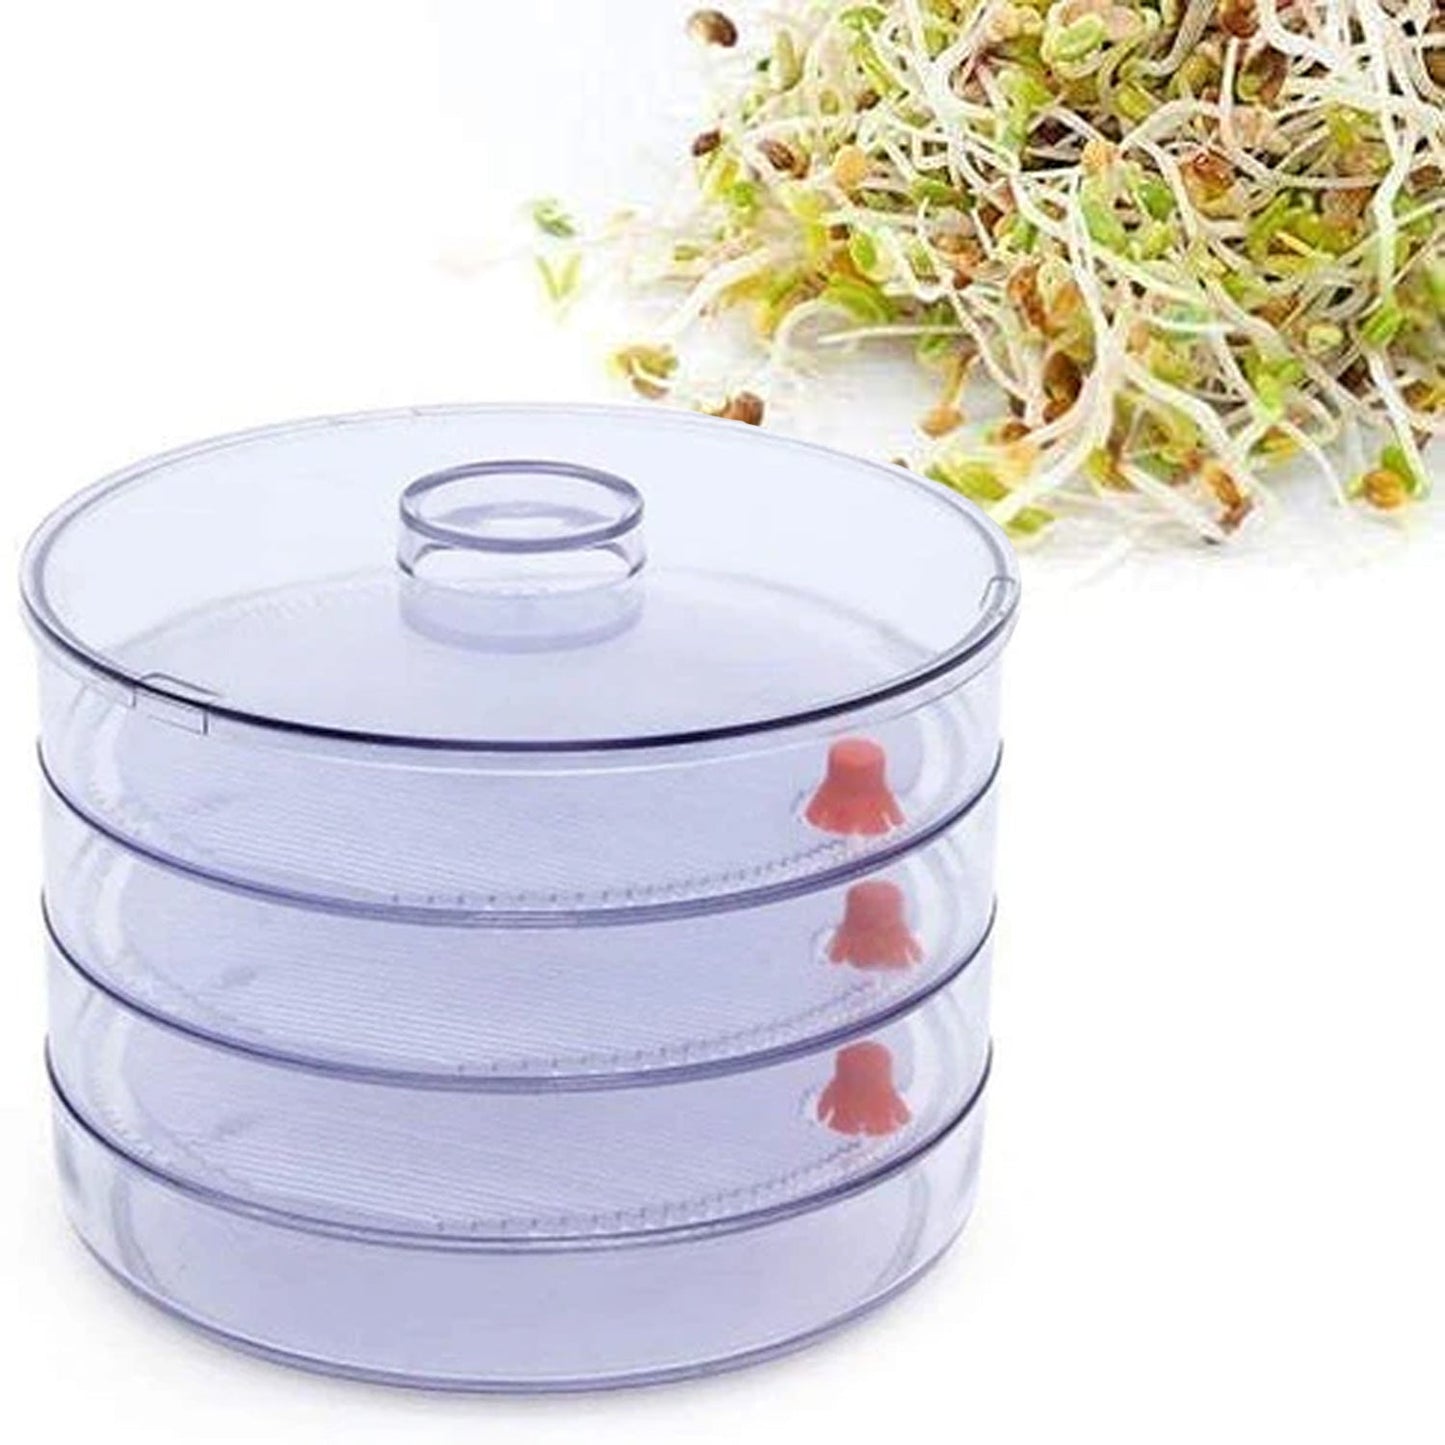 070 Plastic 4 Compartment Sprout Maker, White Dukan Daily